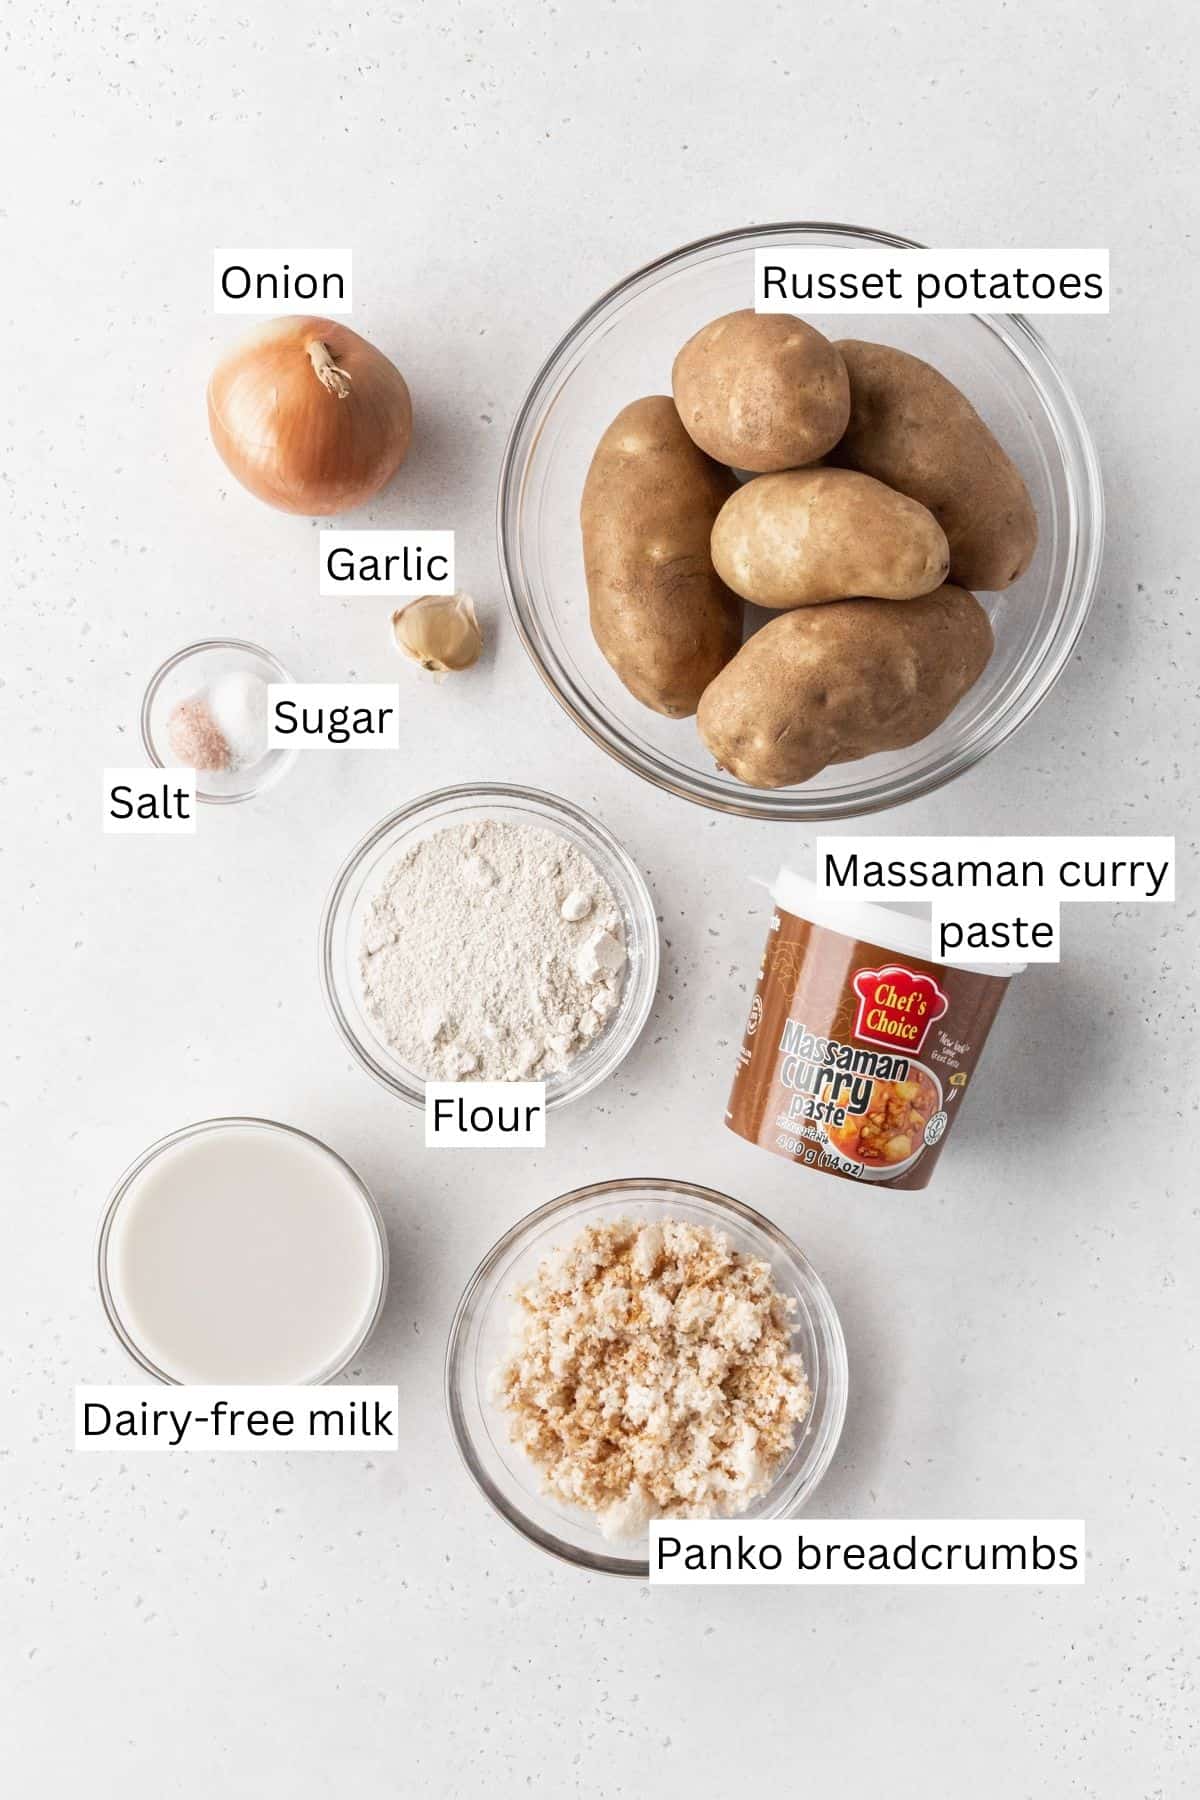 Ingredients for making vegan potato croquettes measured out into bowls on a white surface with text overlay.